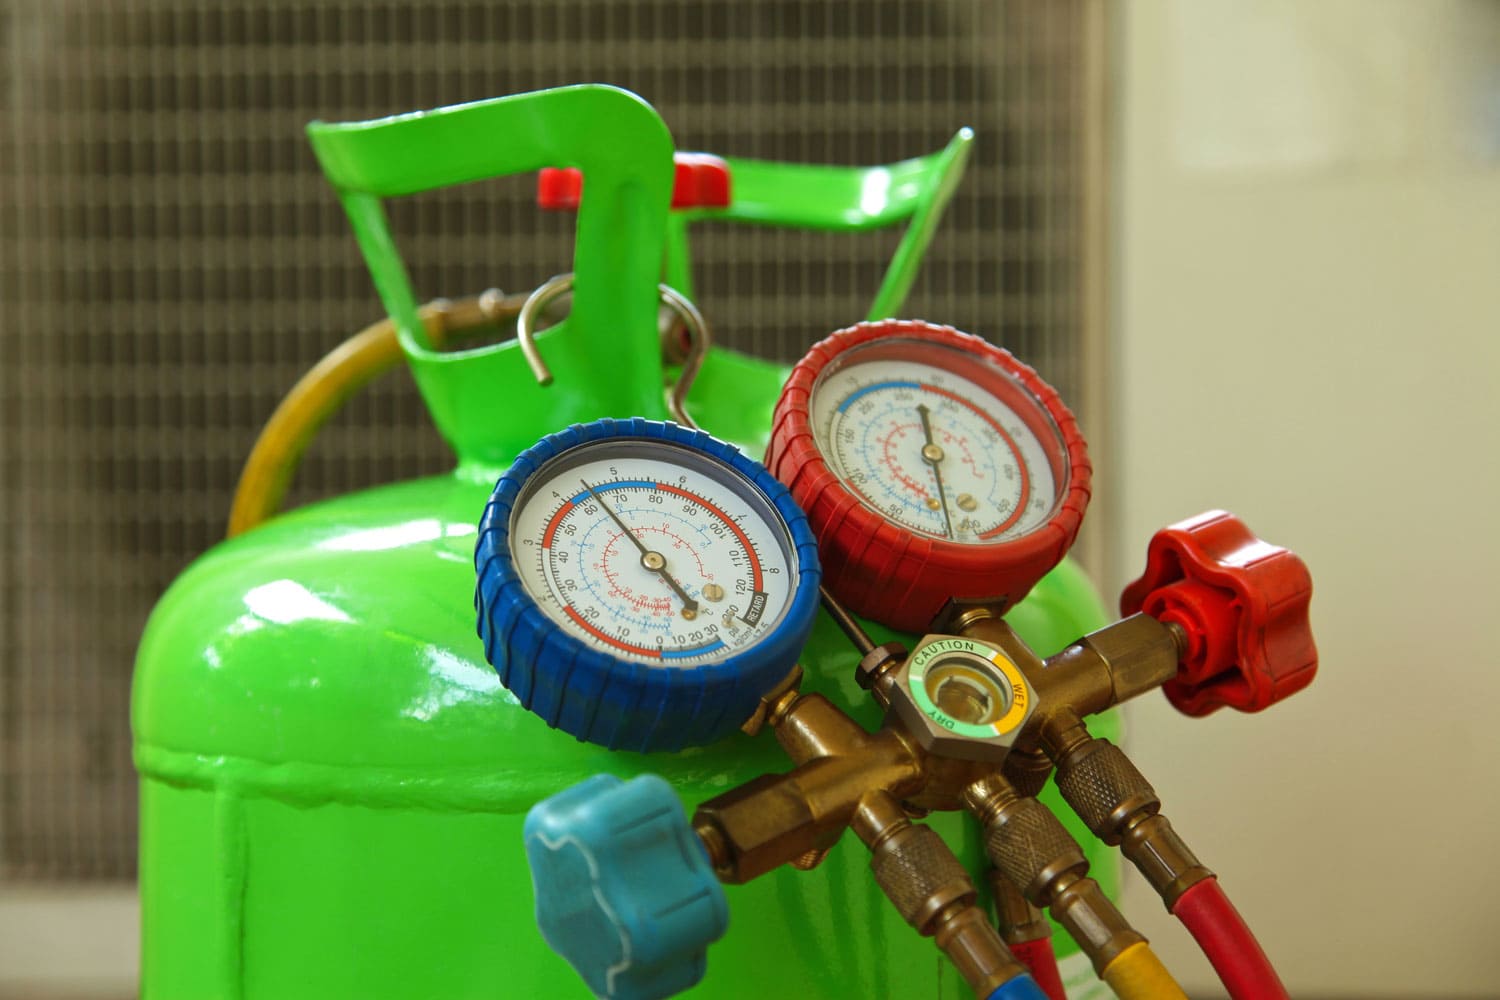 Green Freon tanks and gauges